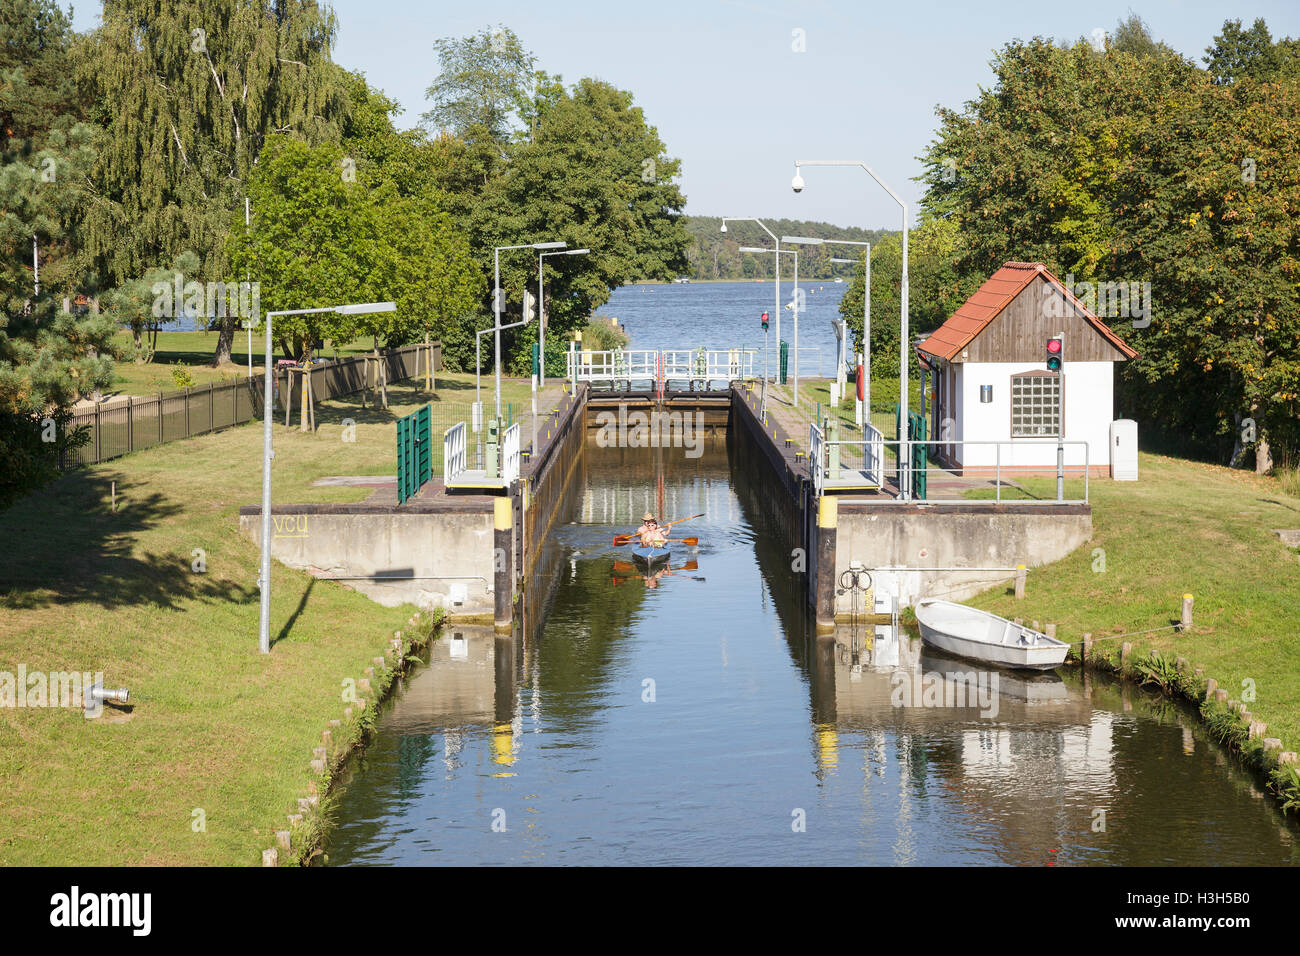 Canal si blocca a Himmelpfort, Brandeburgo, Germania Foto Stock